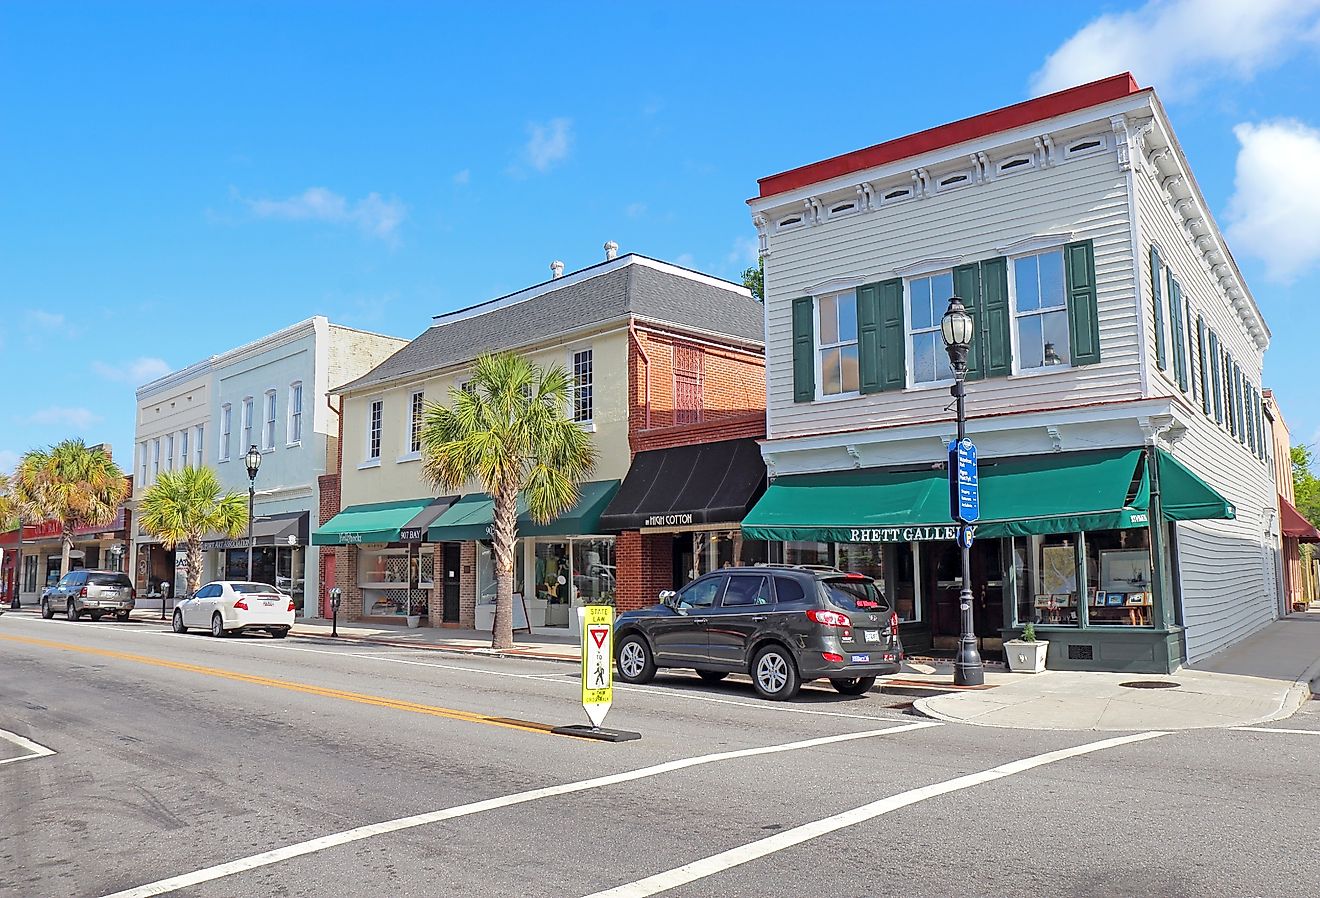 Businesses on Bay Street near the waterfront in the historic district of downtown Beaufort, South Carolina. Image credit Stephen B. Goodwin via Shutterstock